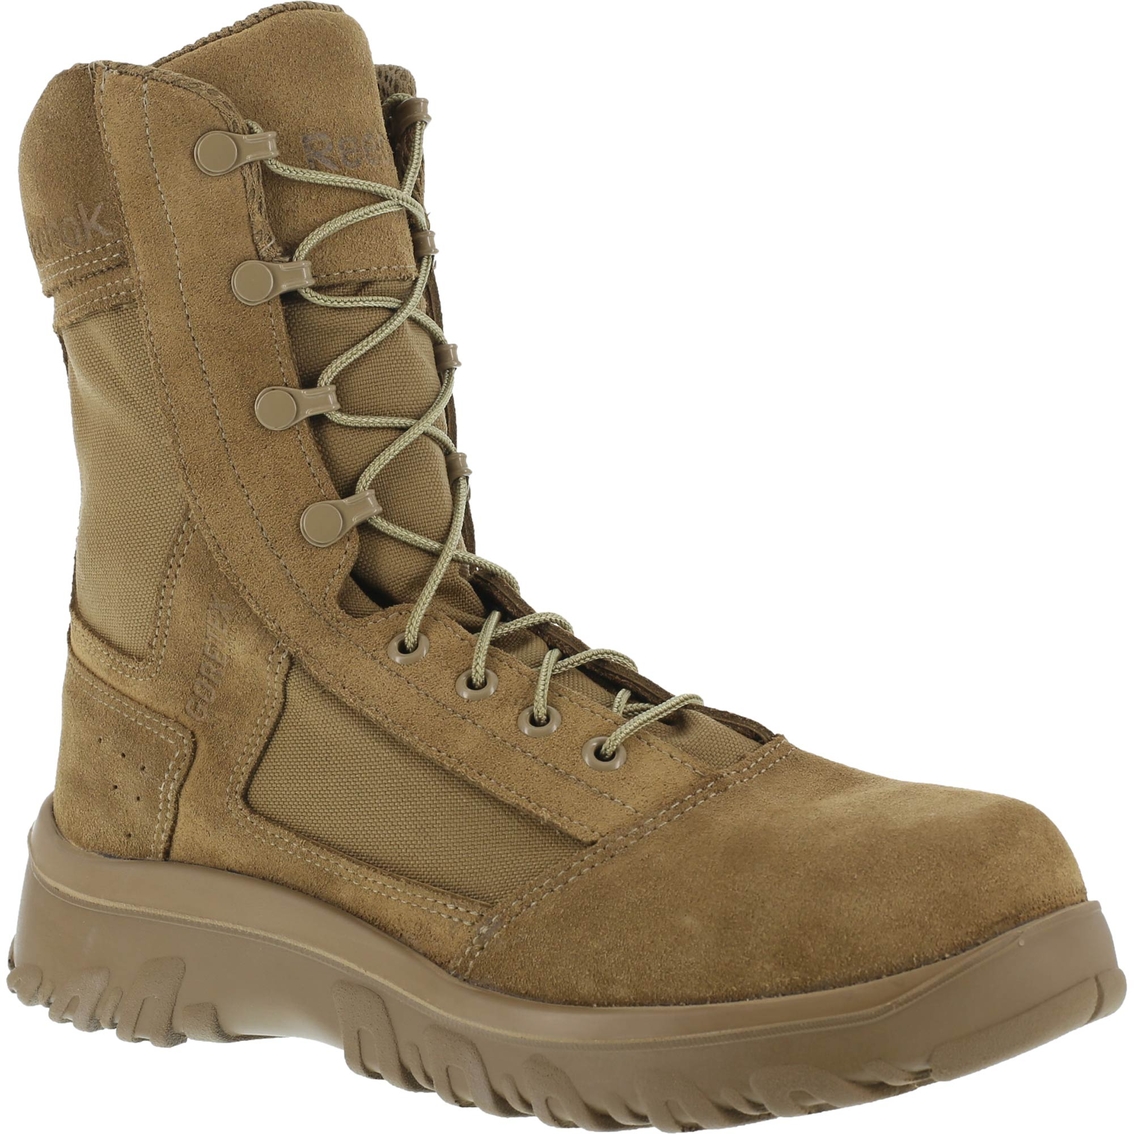 Reebok Krios Coyote Gore-tex Hot Weather Boots | Coyote Brown Boots ...